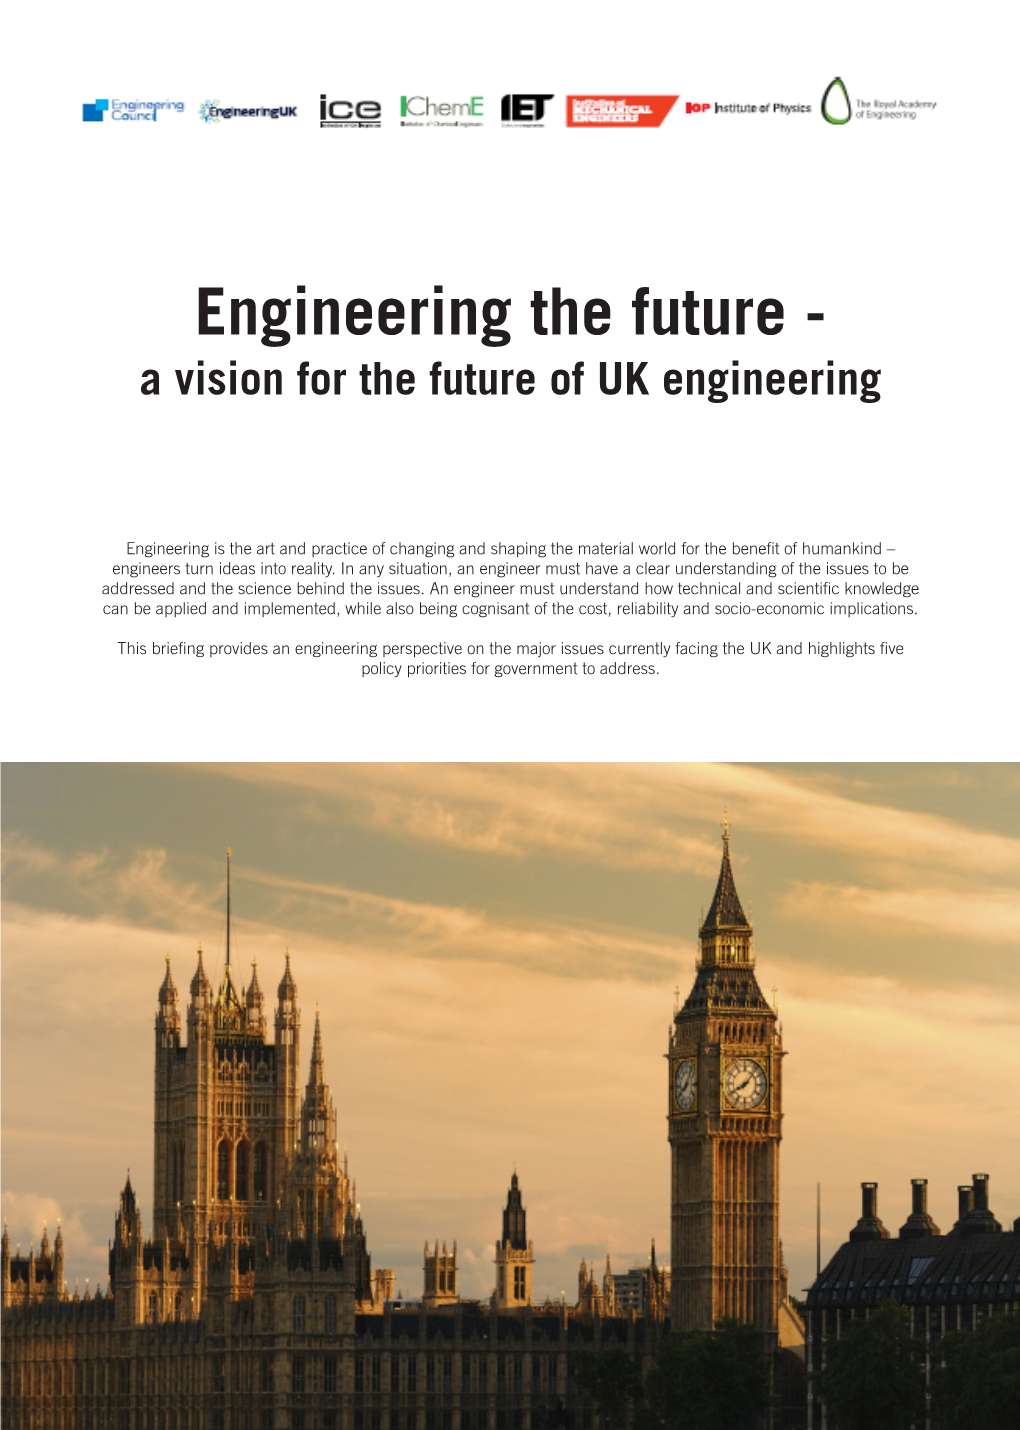 A Vision for the Future of UK Engineering